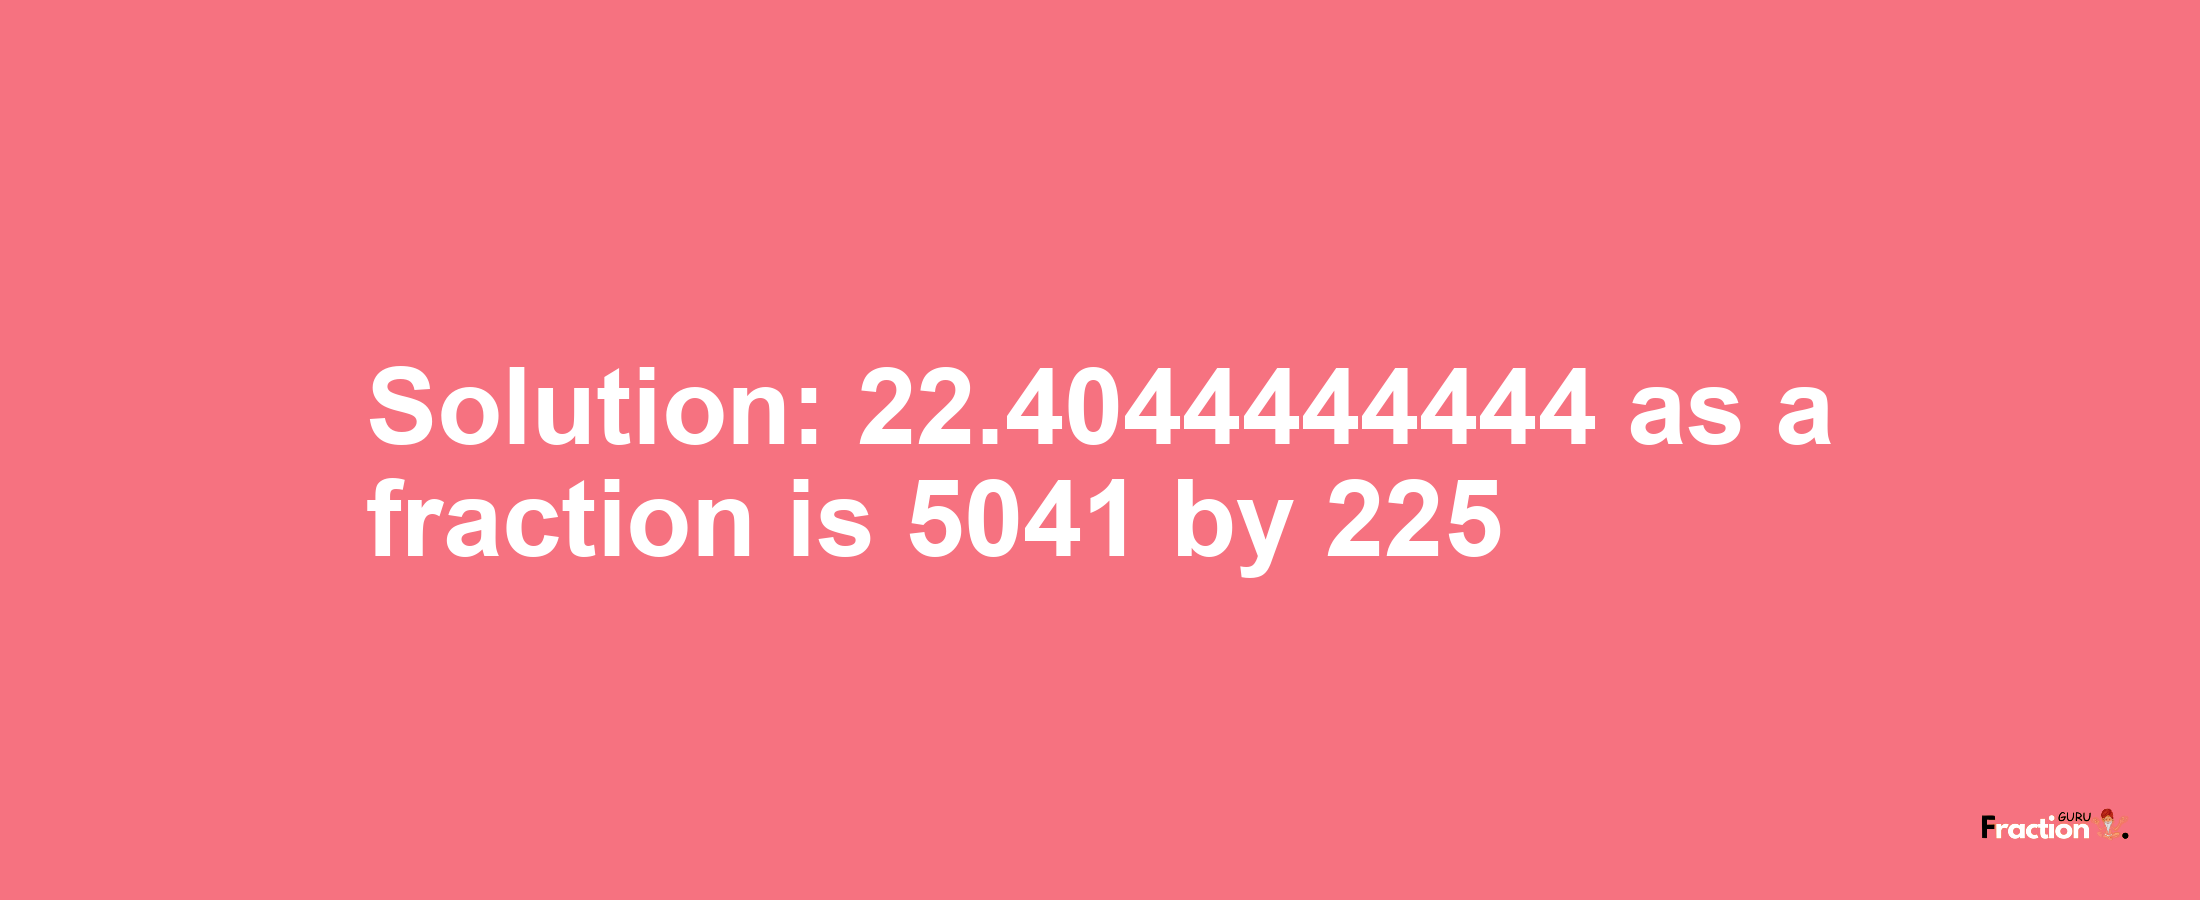 Solution:22.4044444444 as a fraction is 5041/225